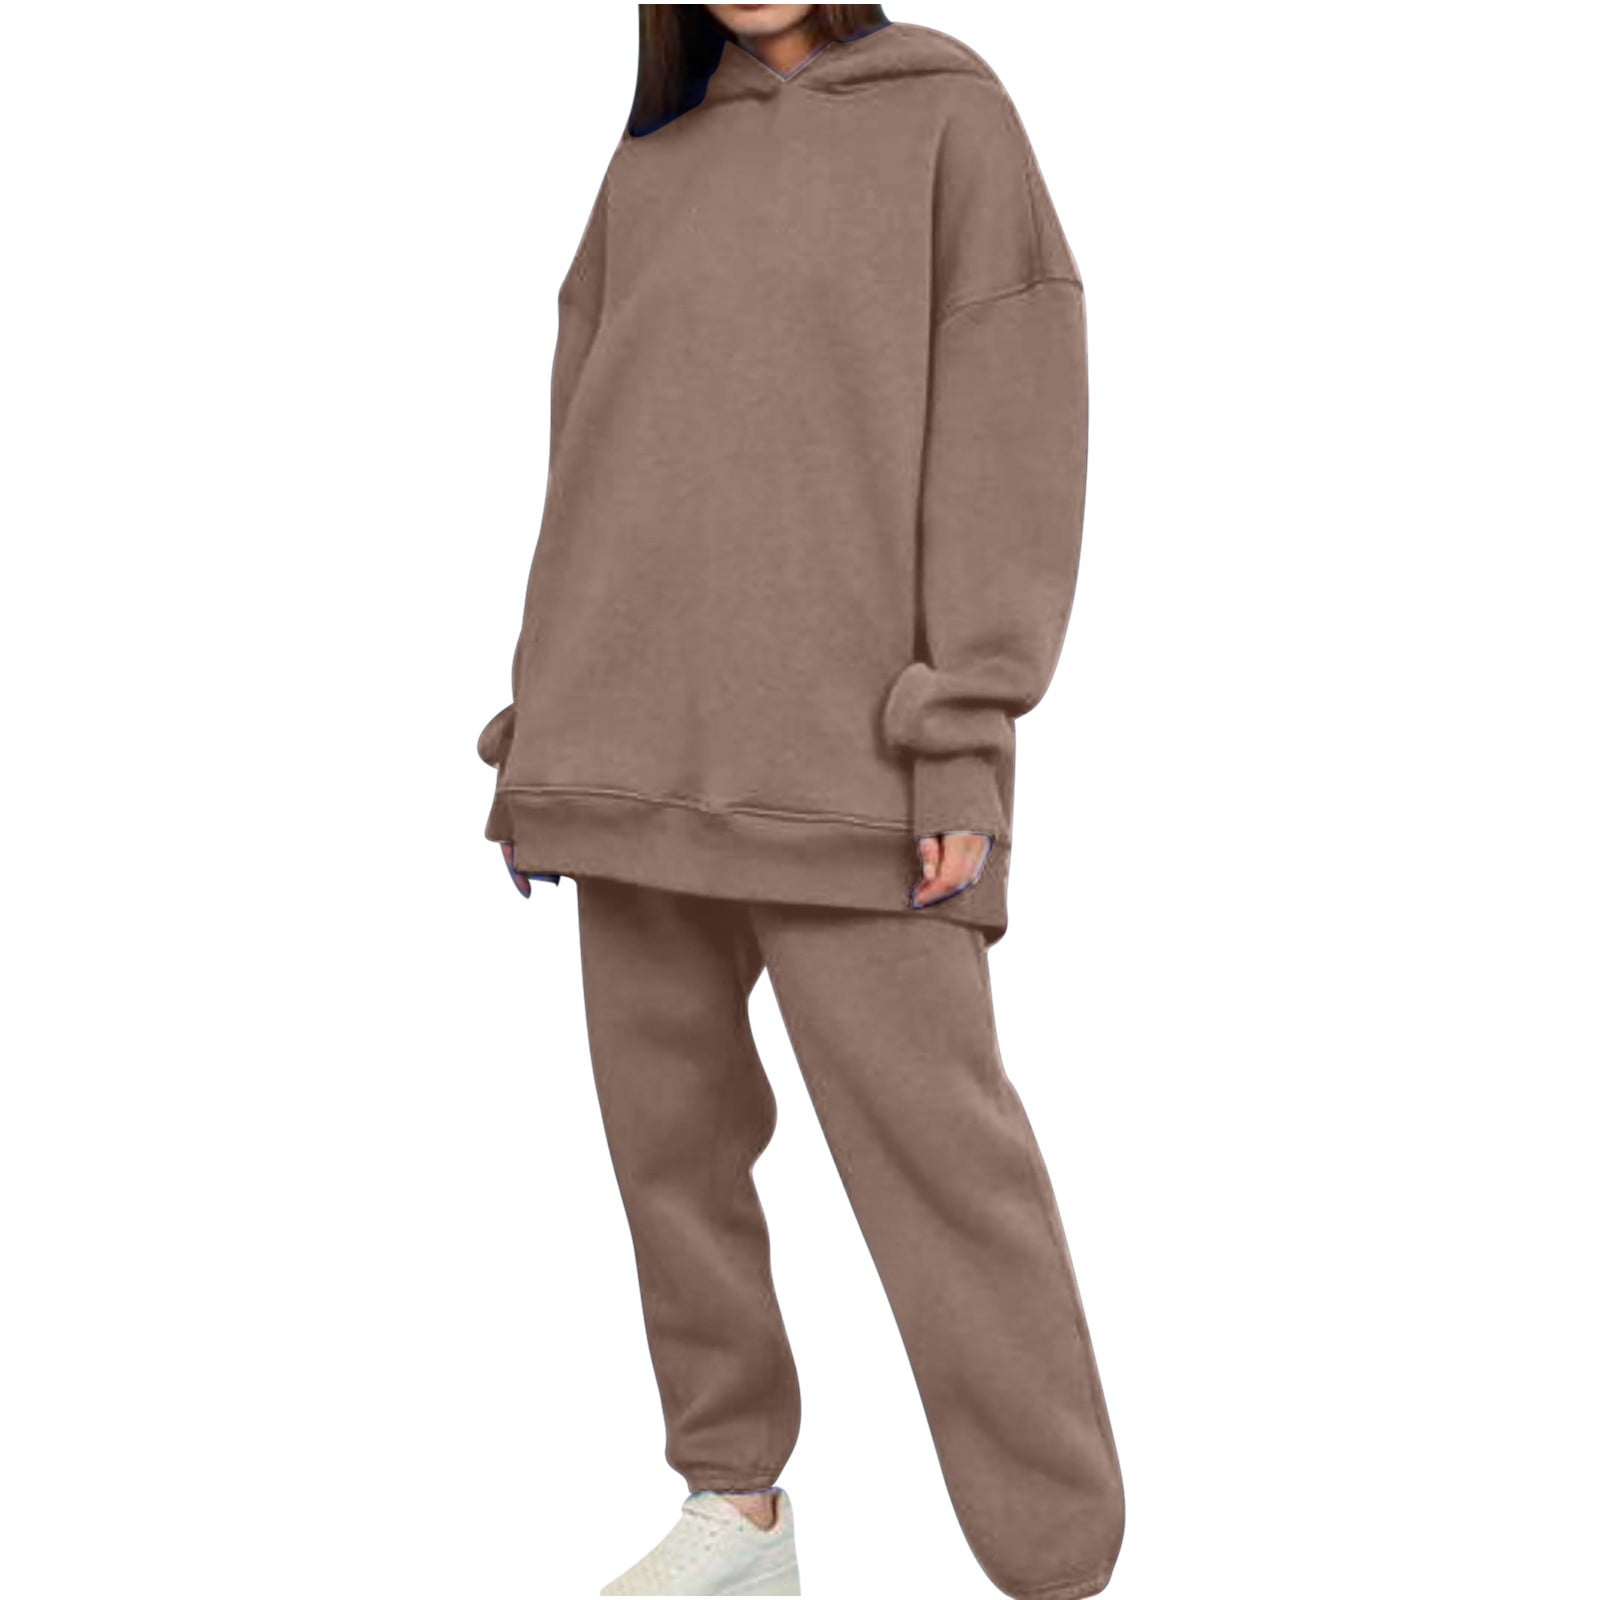 2 Piece Jogging Sets Womens Pocketed Hoodie Sweatshirt and Sweatpants ...